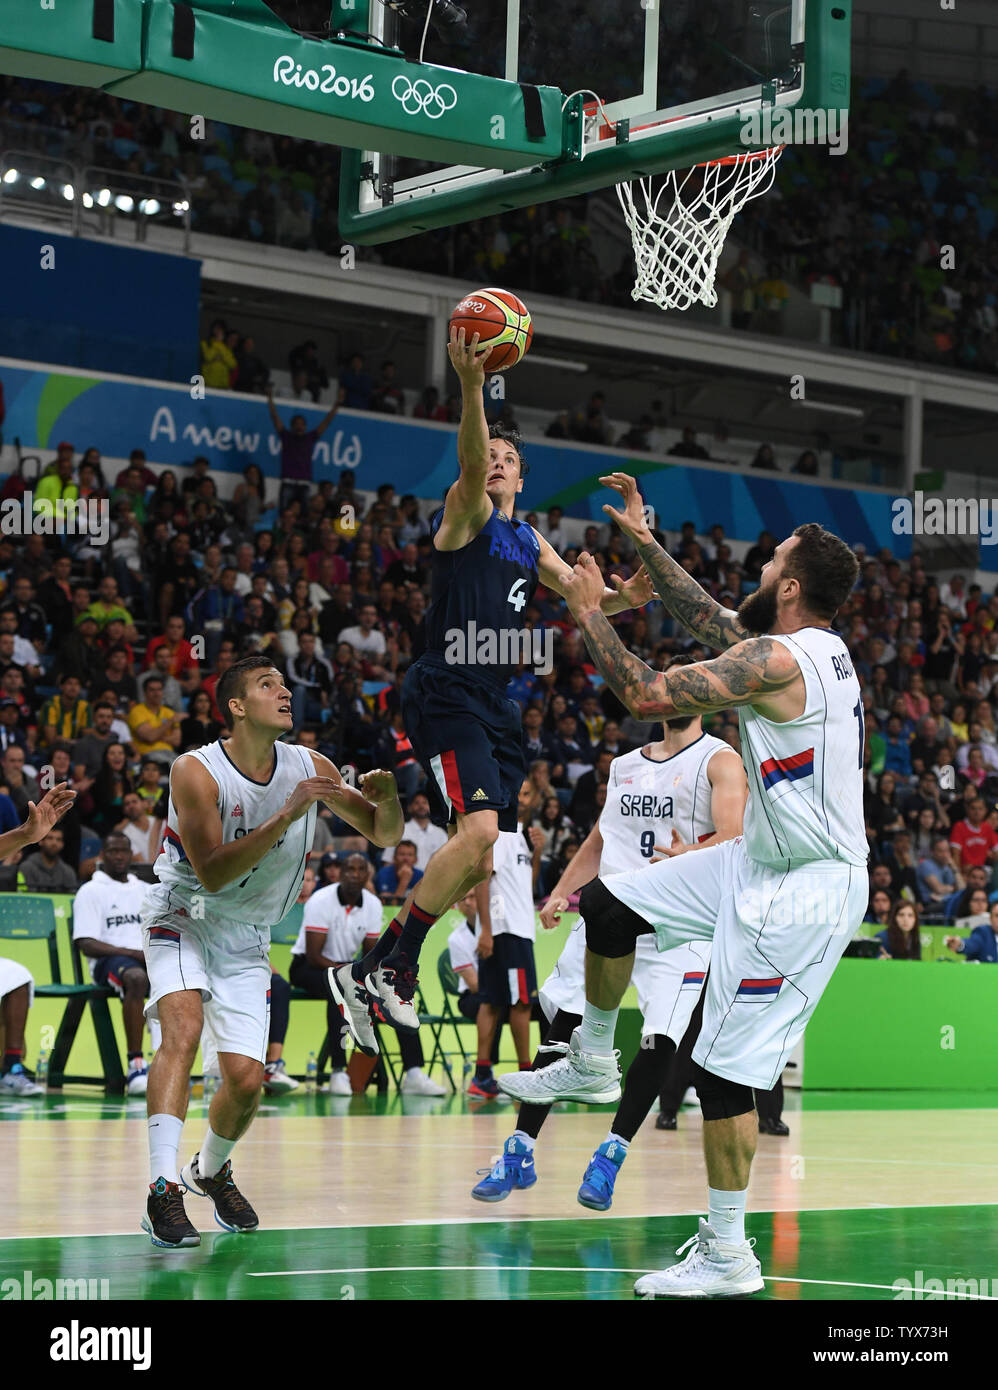 Thomas Heurtel (4) of France takes the ball to the basket against Serbia in Basketball at the 2016 Rio Summer Olympics in Rio de Janeiro, Brazil, August 10, 2016.  France defeated Serbia 76-75 in a come from behind victory in the last minute.  Photo by Terry Schmitt/UPI Stock Photo